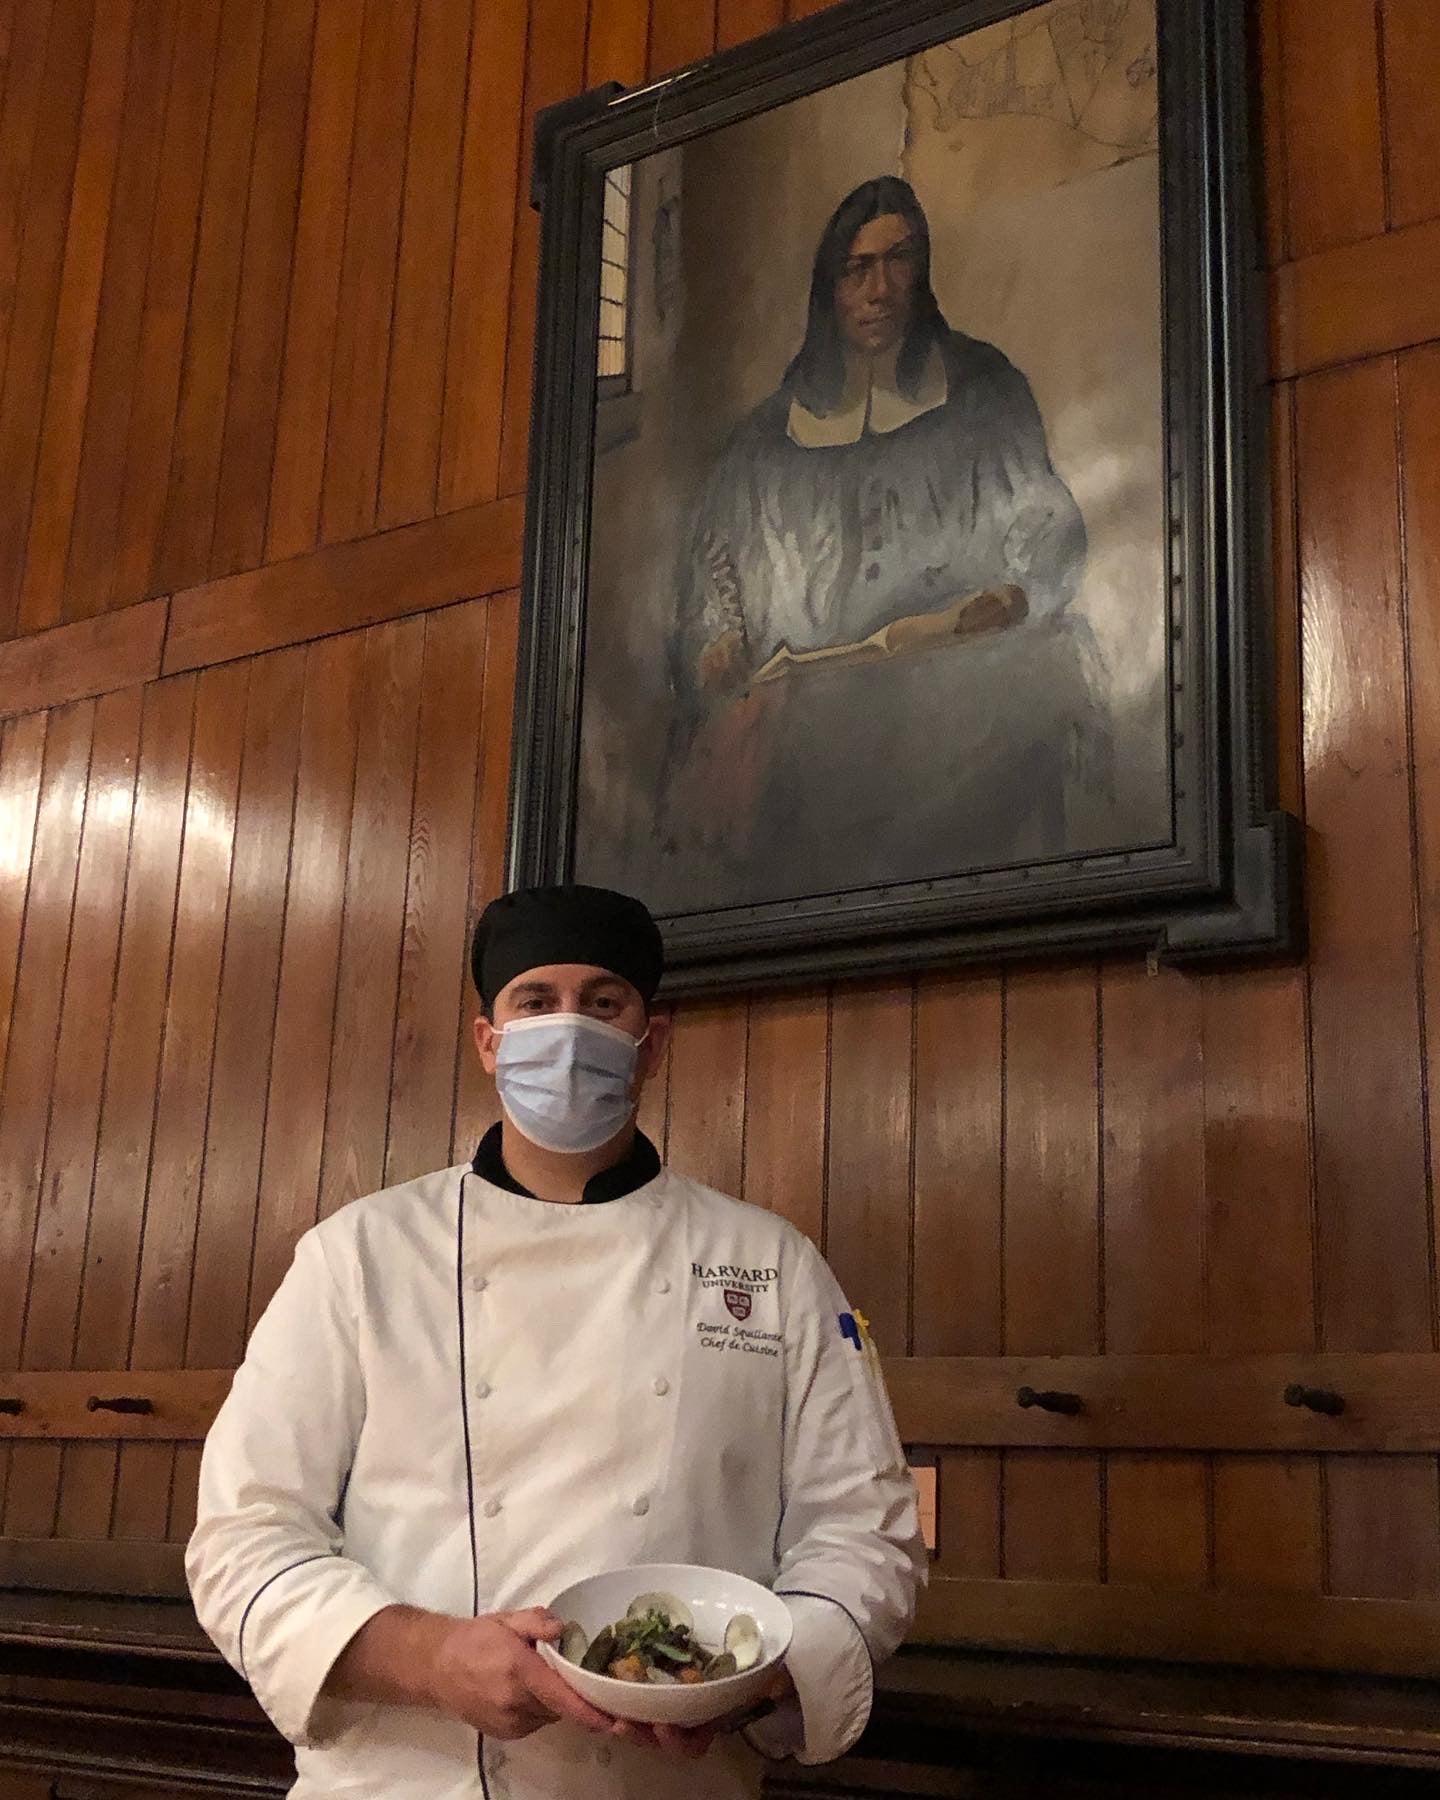 A chef standing in front of a portrait of a Native American